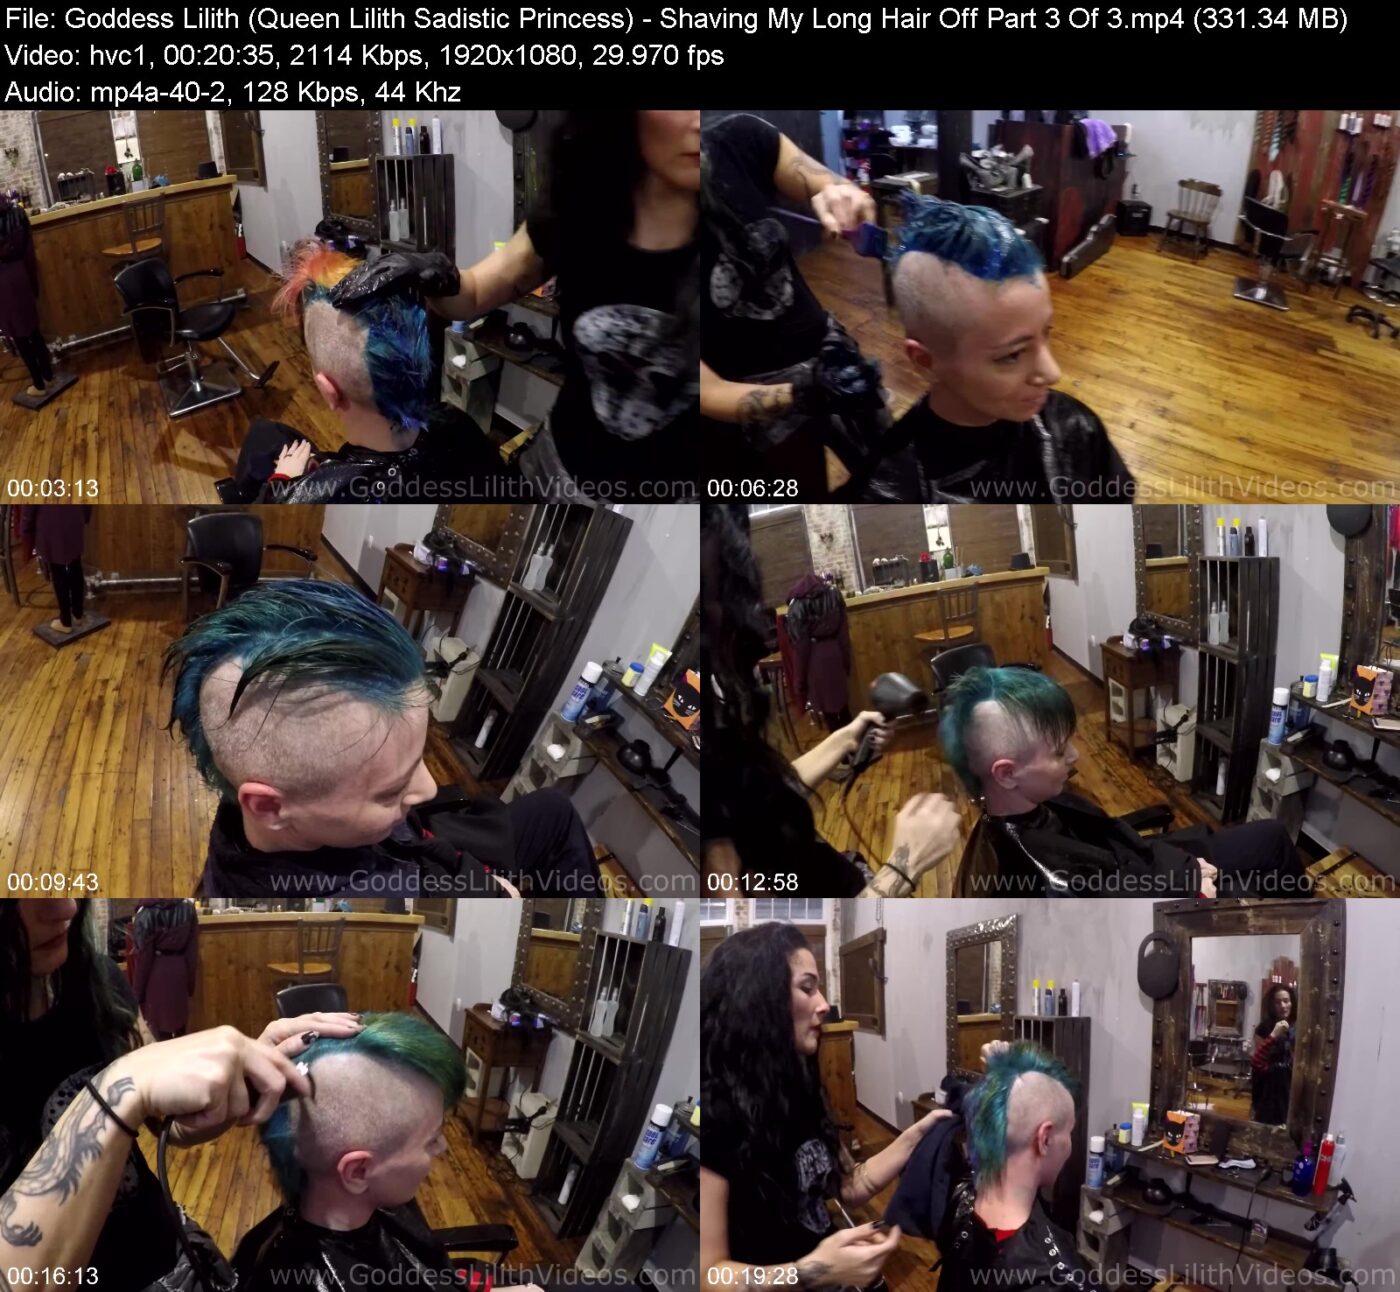 Goddess Lilith (Queen Lilith Sadistic Princess) in Shaving My Long Hair Off Part 3 Of 3